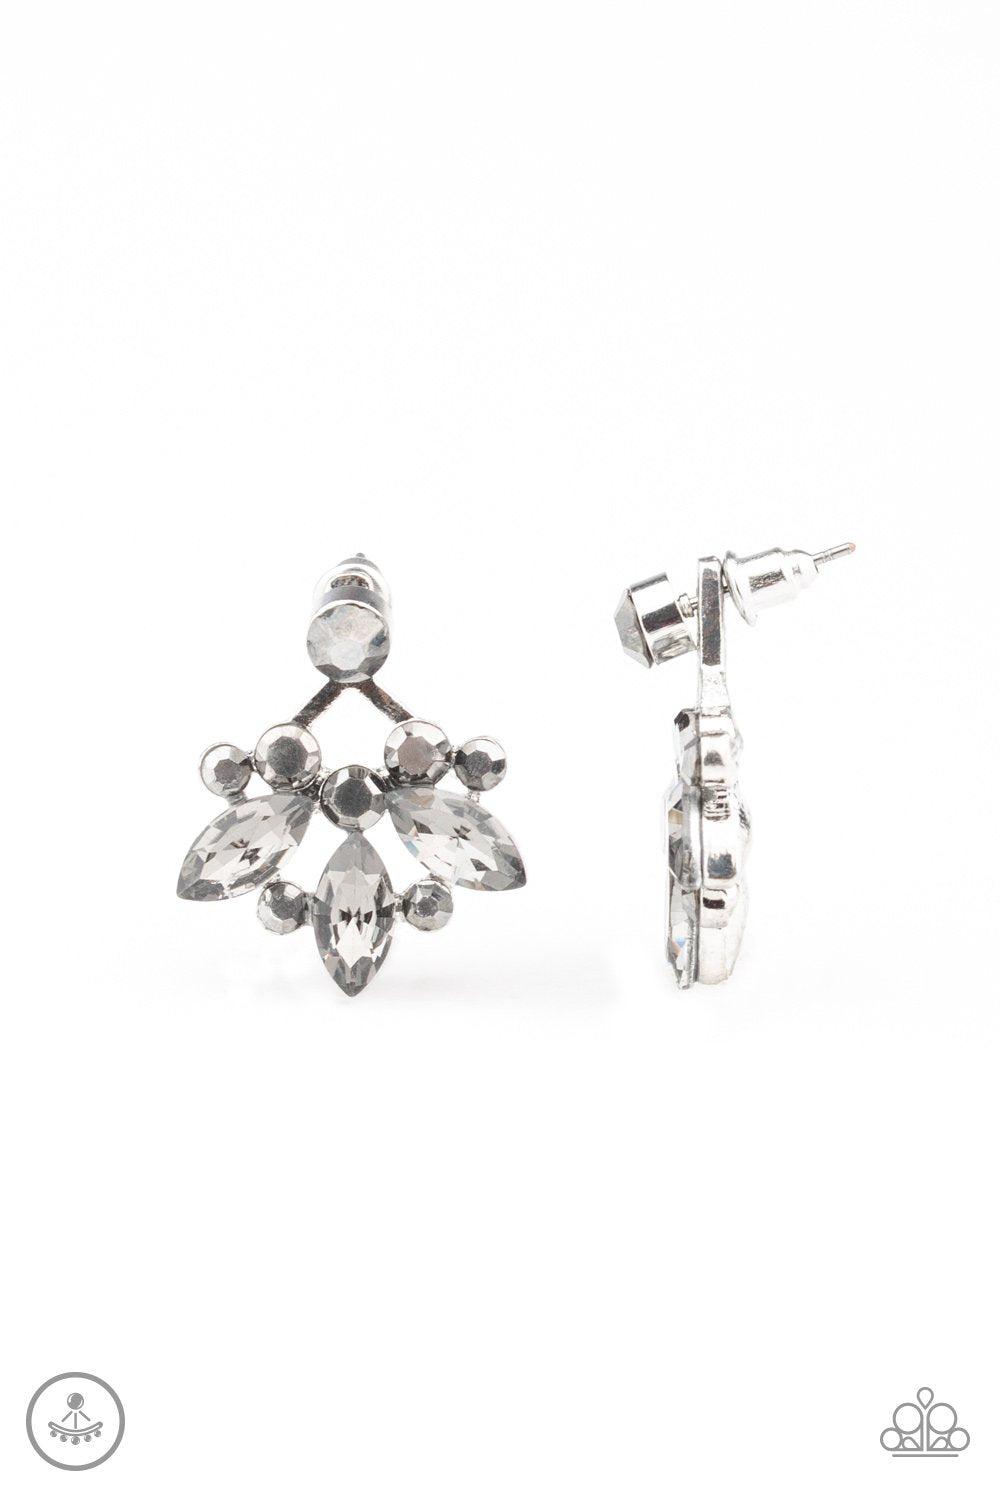 Crystal Constellations Silver Double-sided Post Earrings - Paparazzi Accessories-CarasShop.com - $5 Jewelry by Cara Jewels